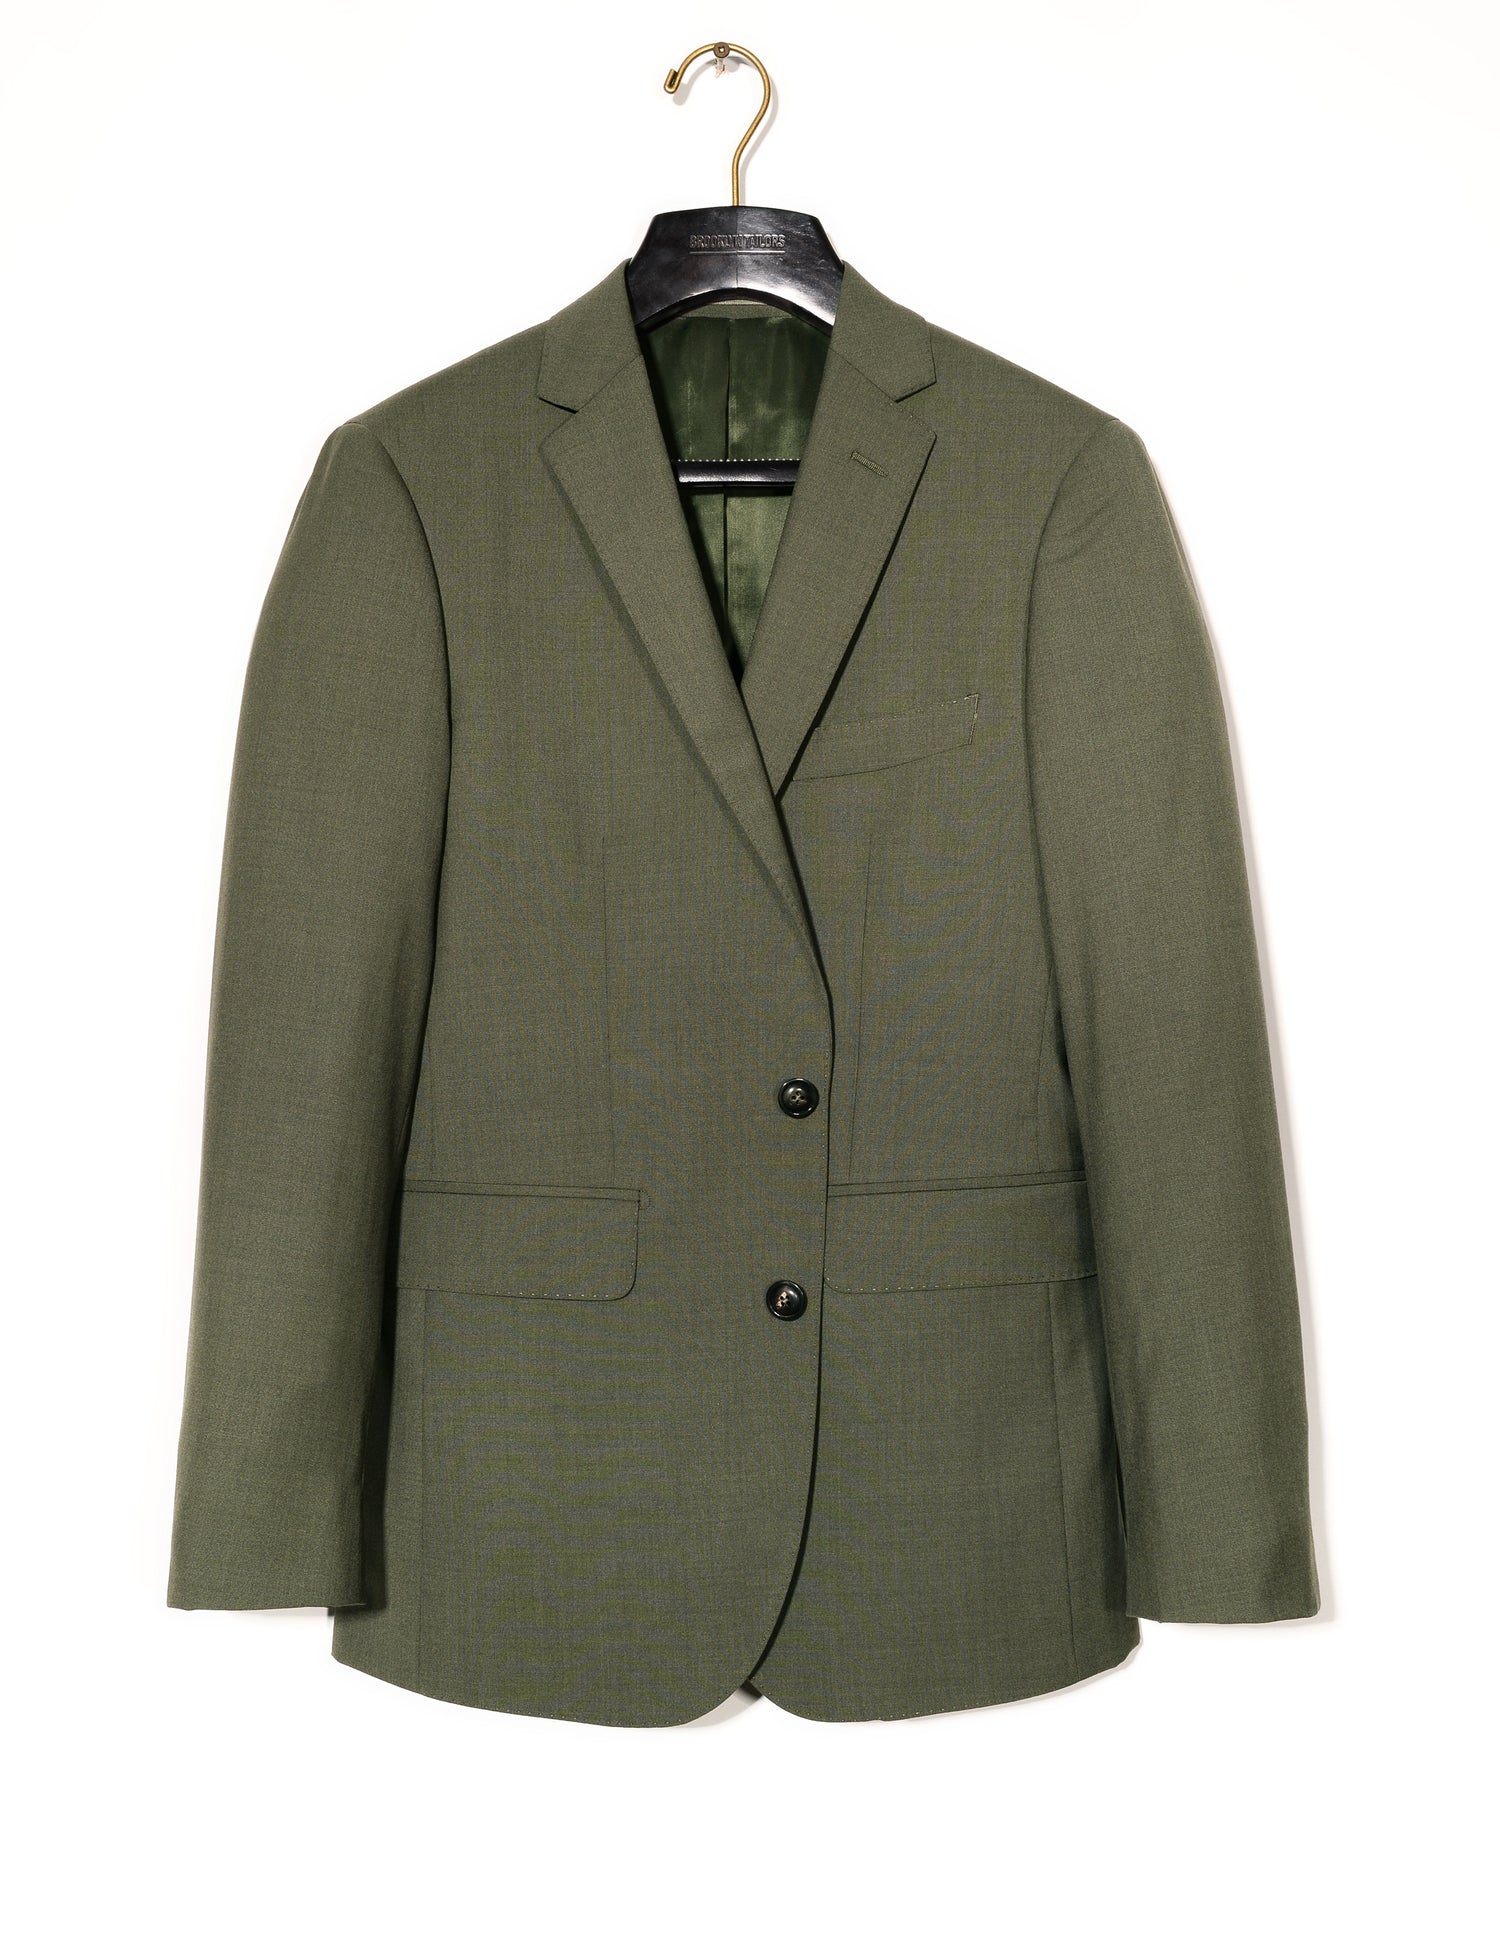 Brooklyn Tailors BKT50 Tailored Jacket in 14.5 Micron Mouliné - Agave Green full length shot on hanger